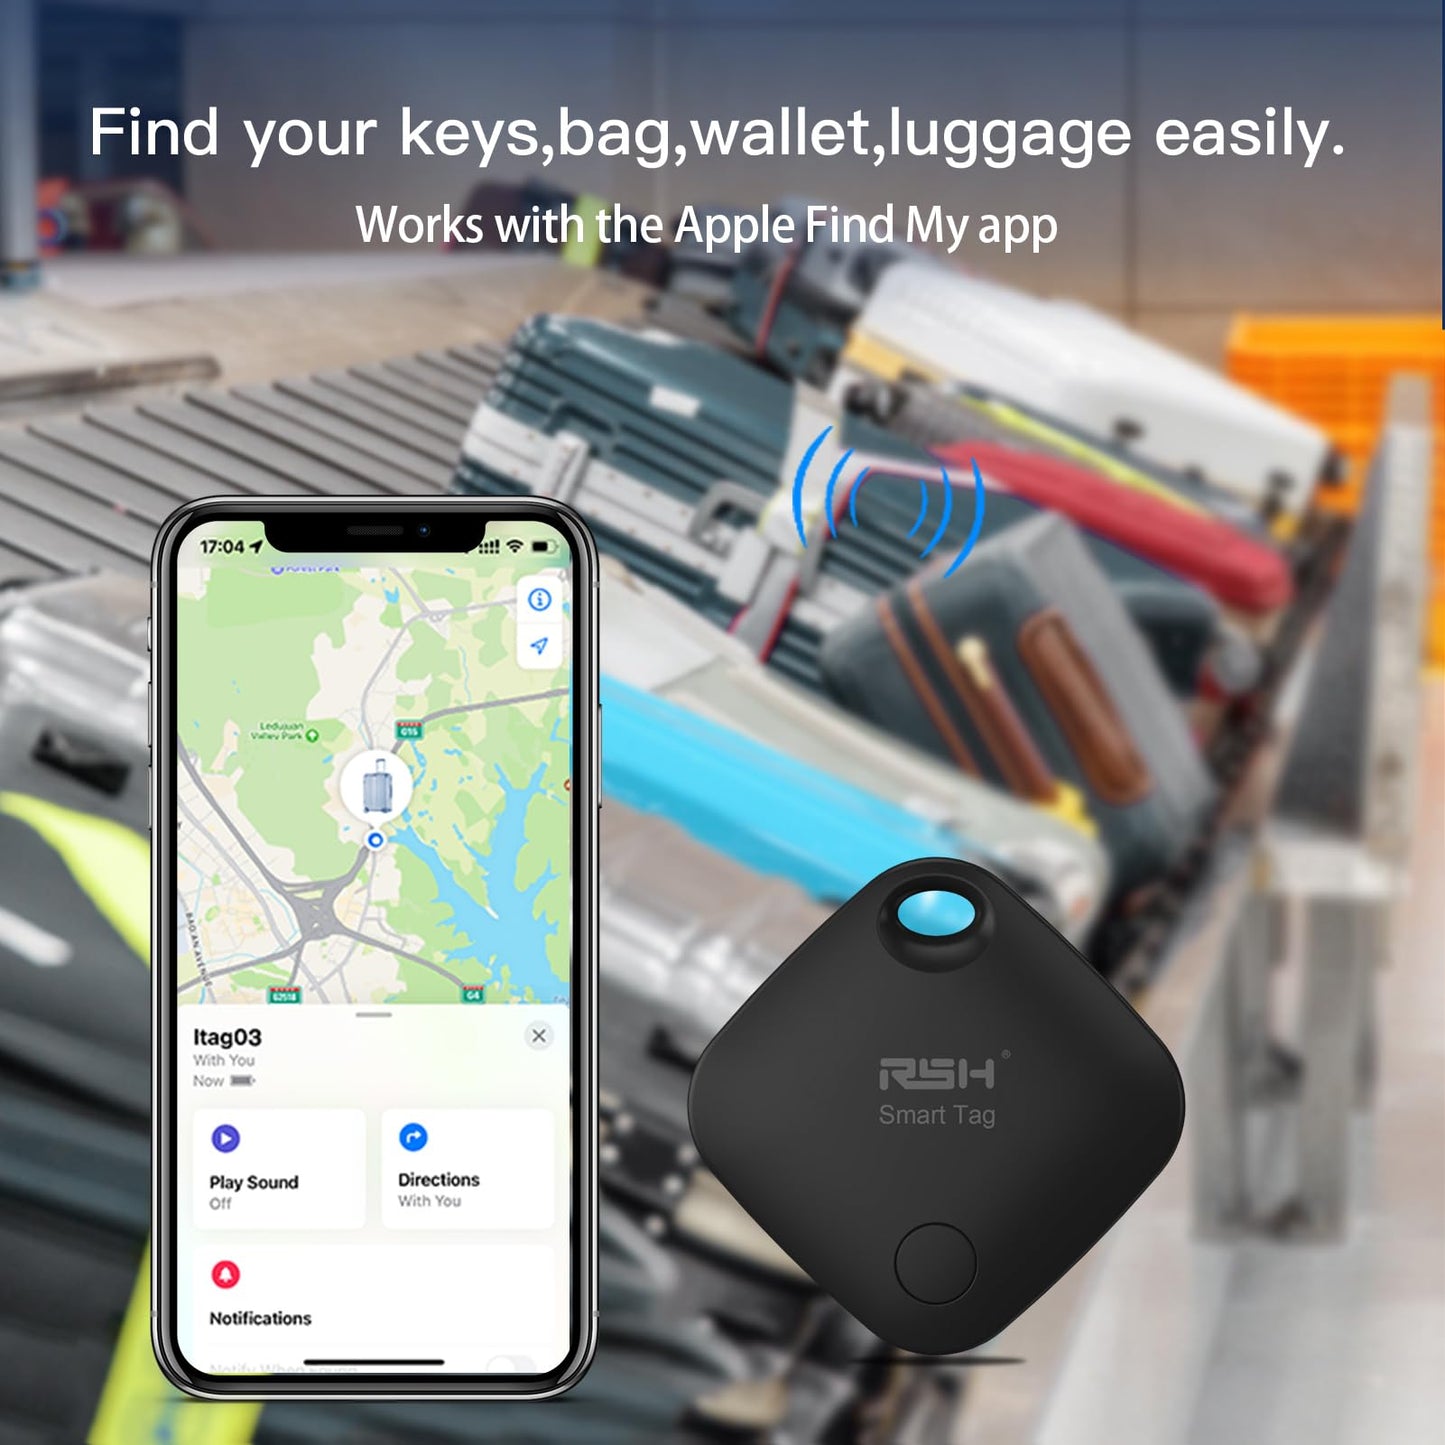 Key Finder Bluetooth Luggage Tracker tag Locator Works with Apple Find My,Smart Tracker for Suitcase, Bag, Backpack, Wallet,Replaceable Battery Smart tag Item Finder (2 Black Tag & Case)